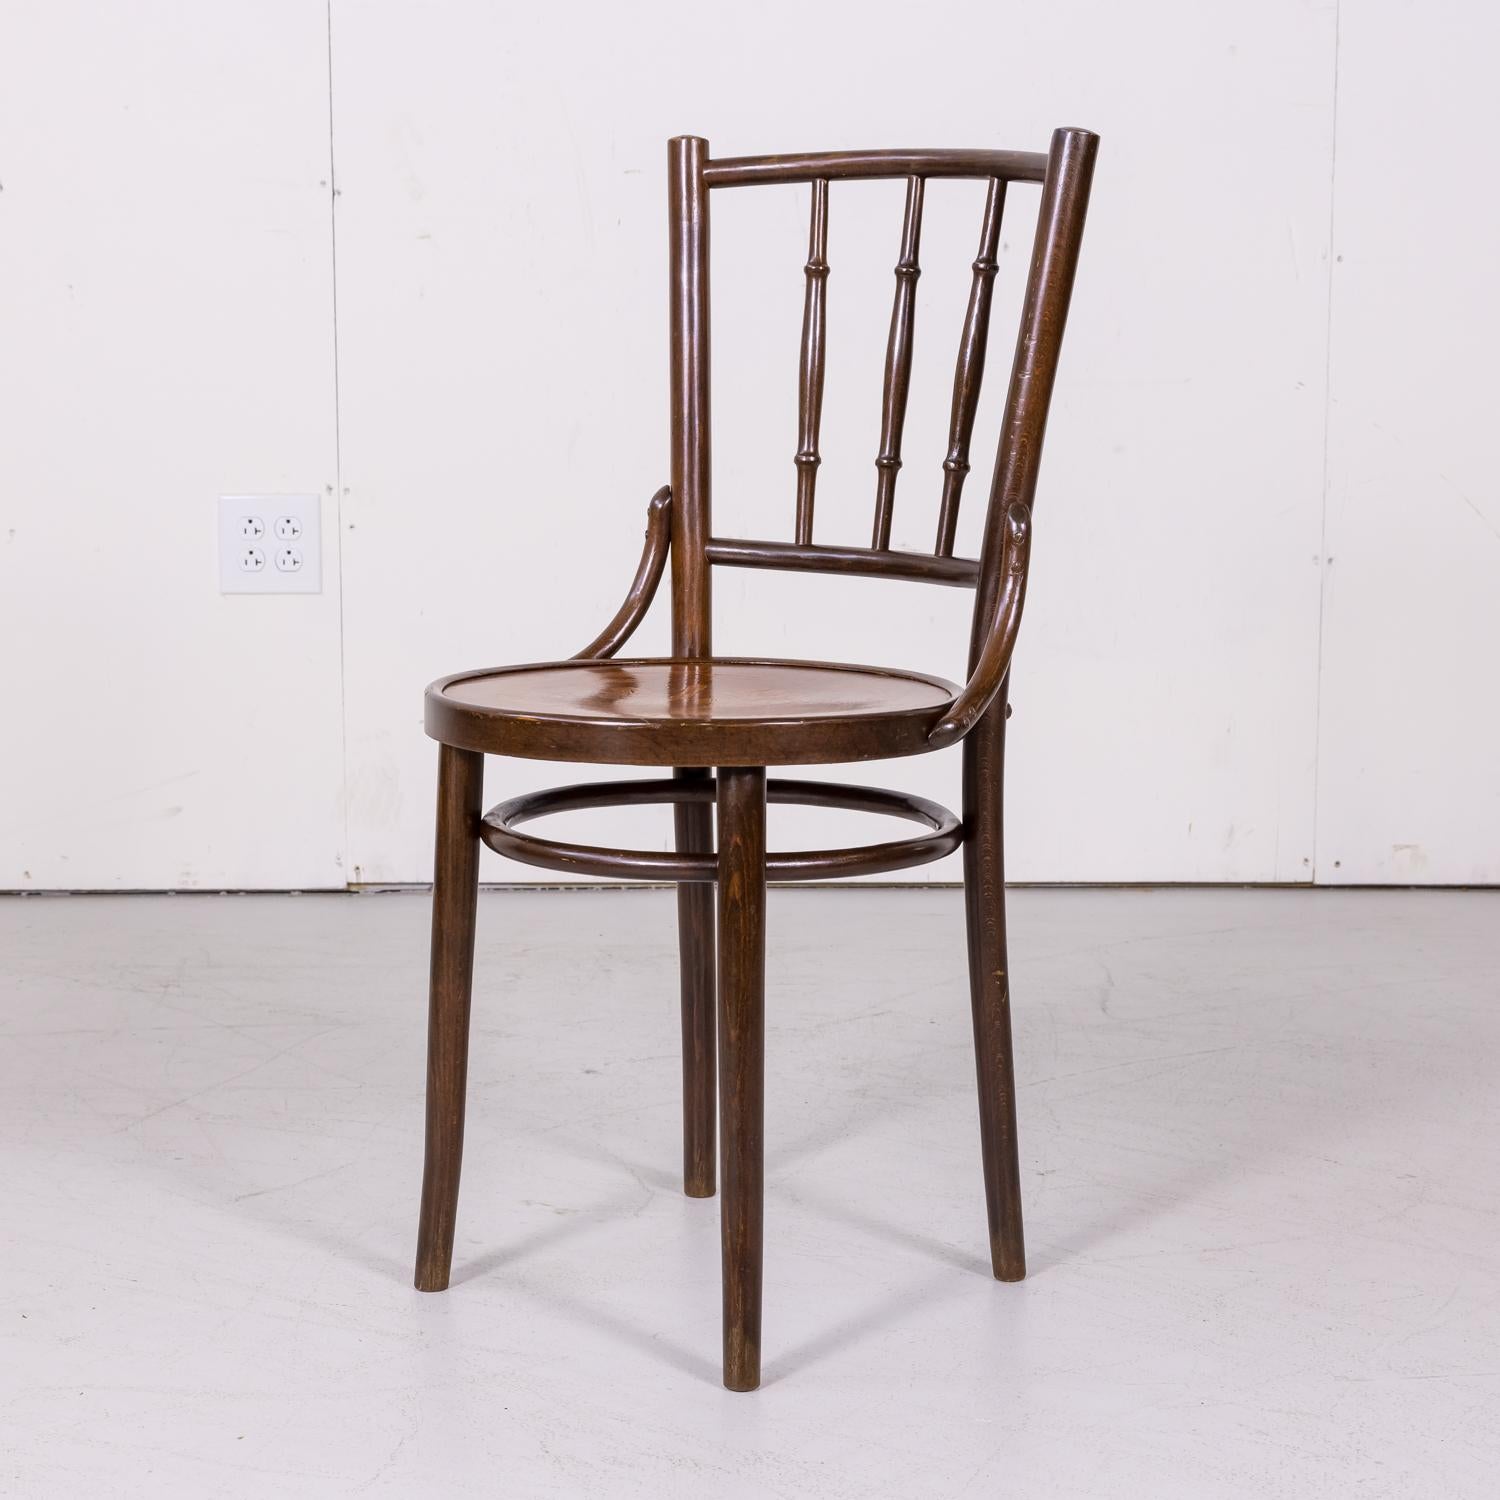 Early 20th Century Set of 8 Classic Bentwood Cafe Chairs by Mundus and J. & J. Kohn